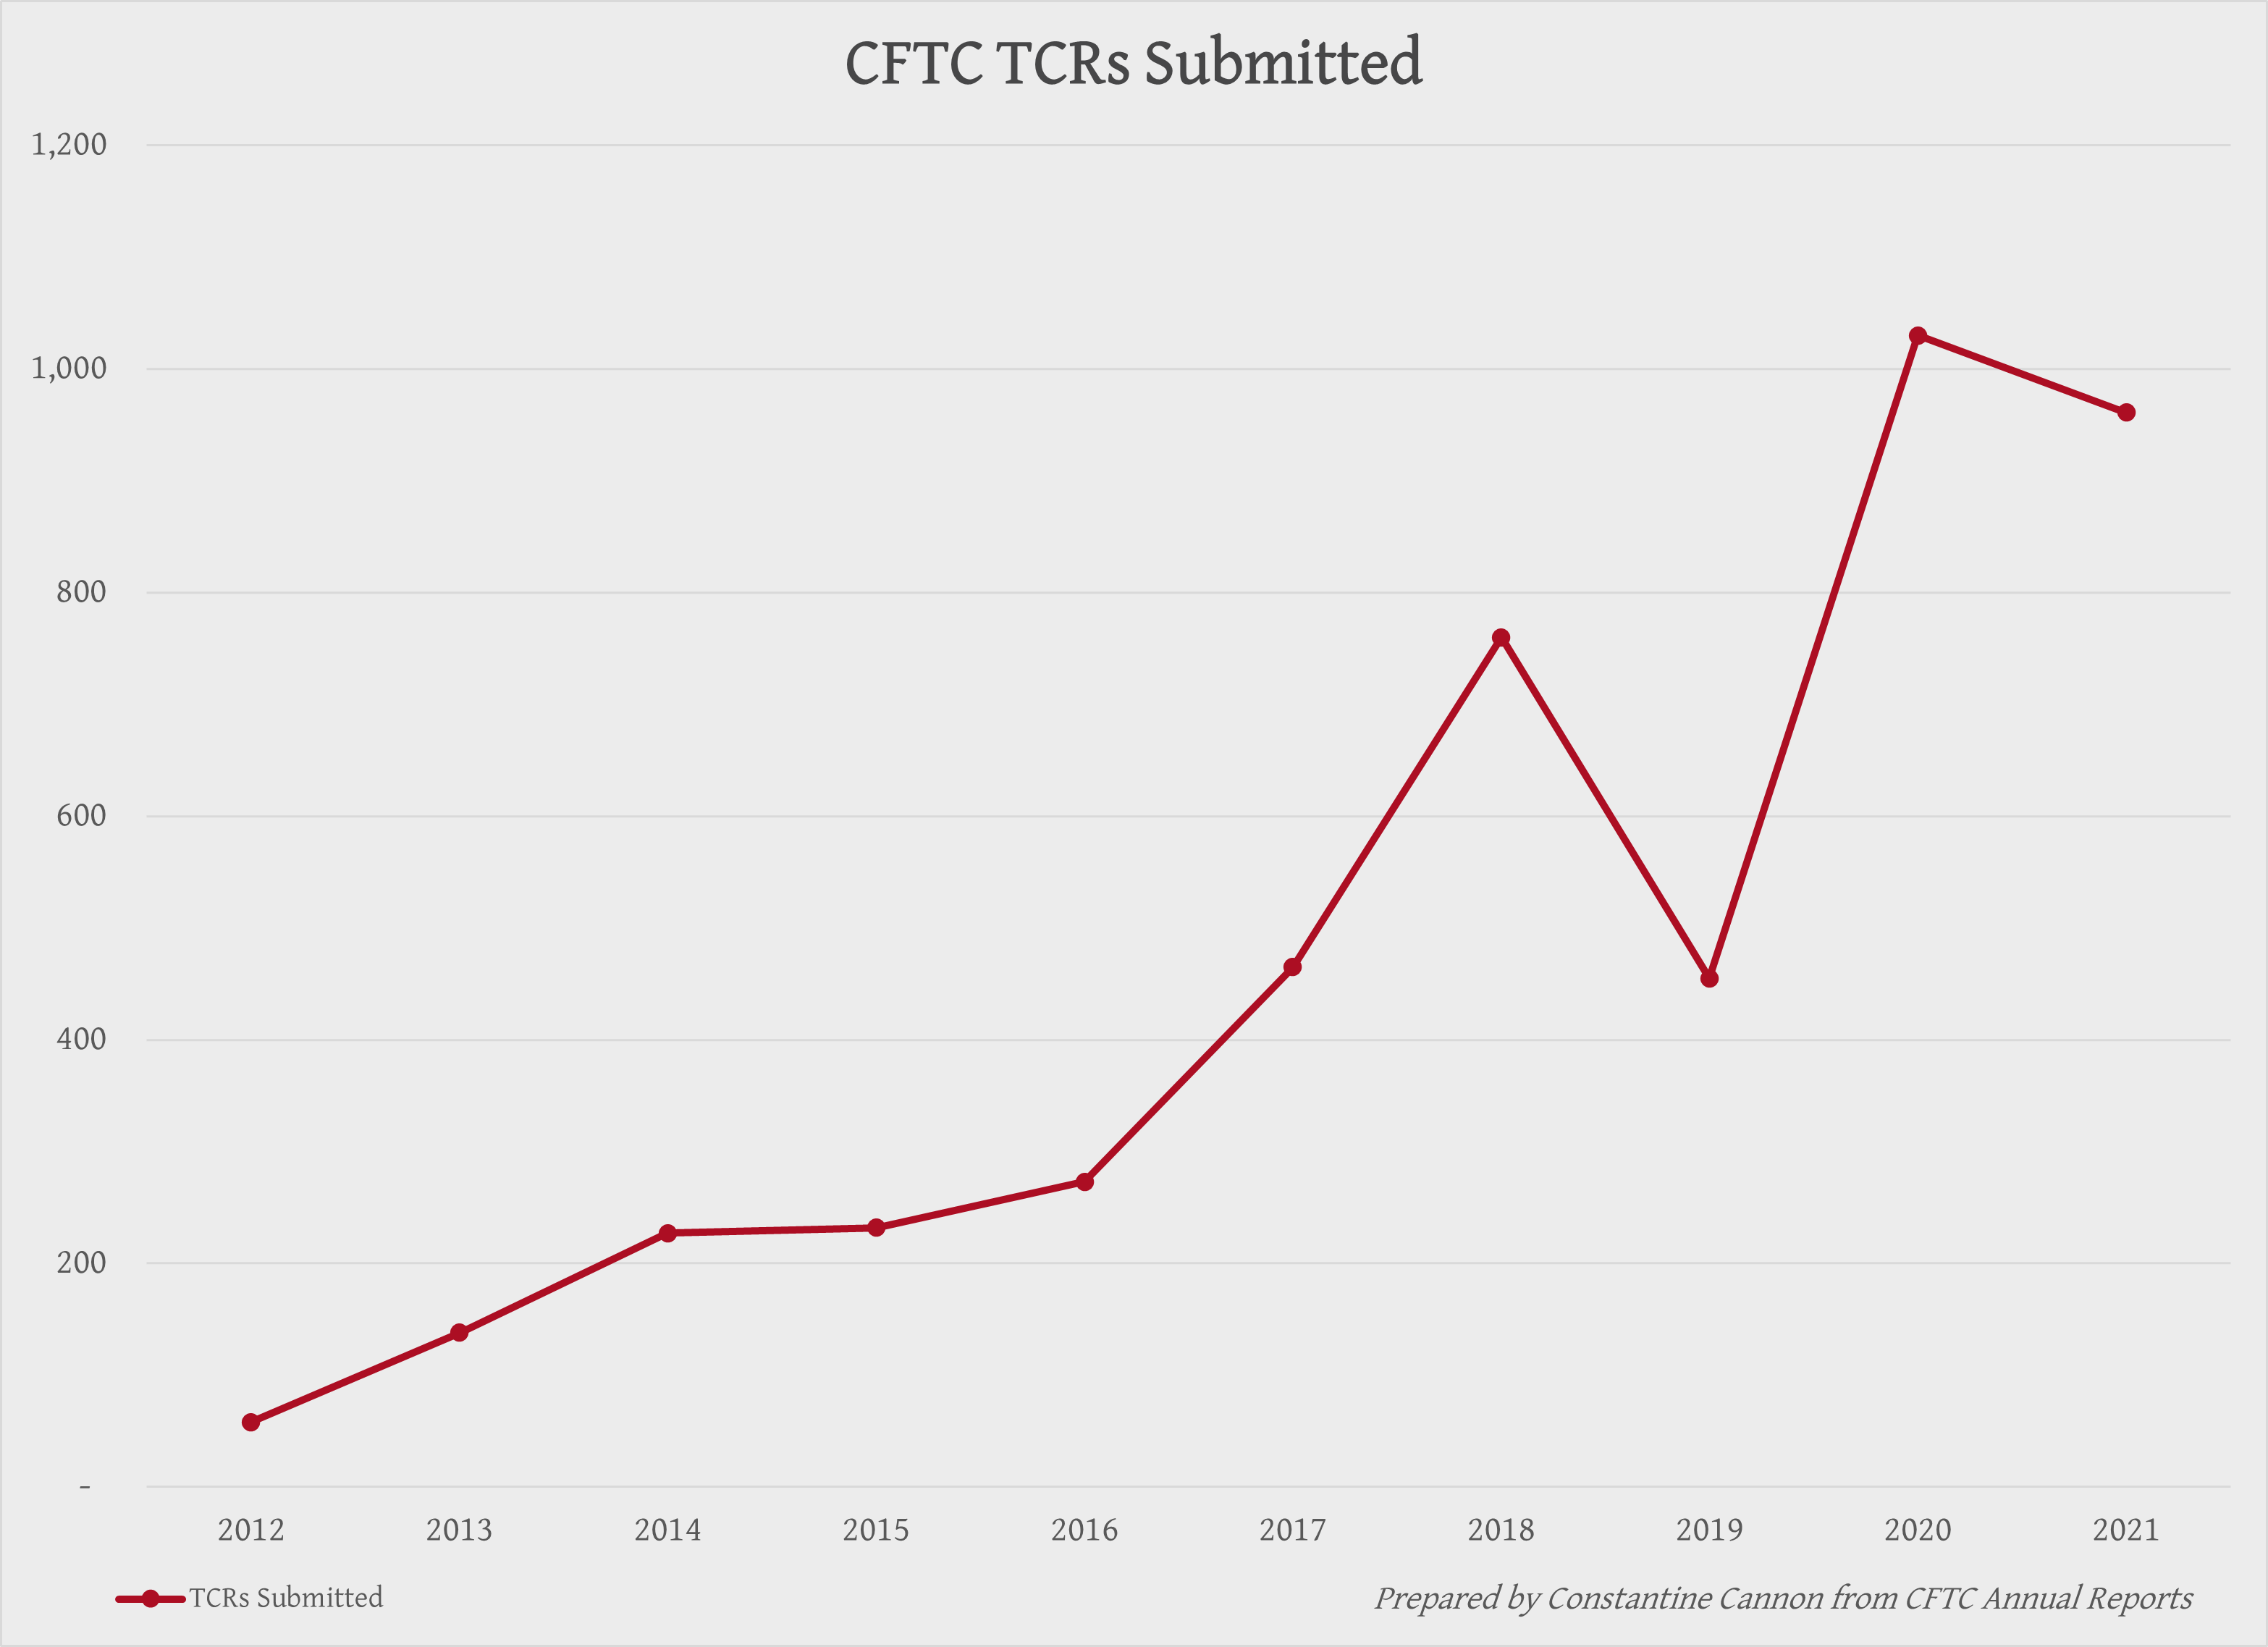 CFTC TCRs by Year, 2012-2021